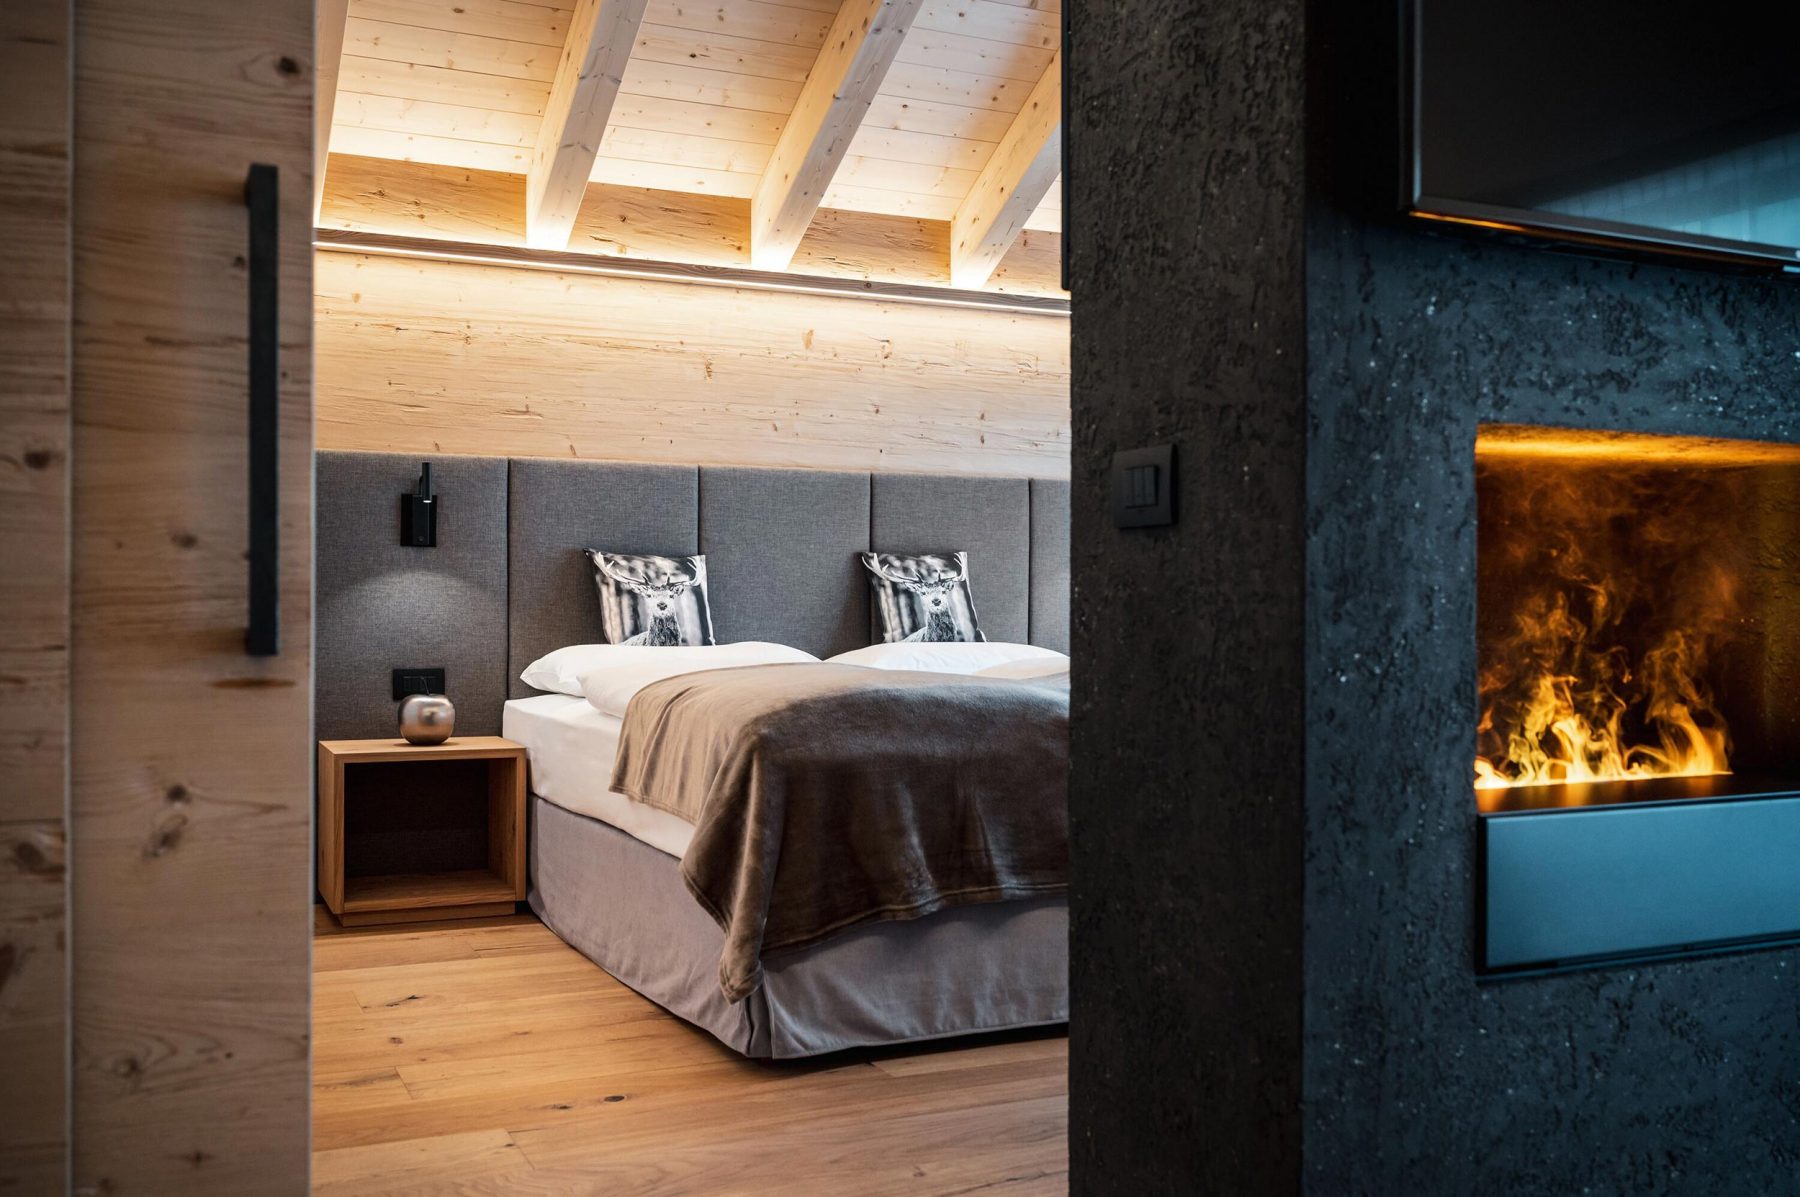 One upscale room at the Hotel Antines. Book your stay at the Hotel Antines here. Planning your summer in the mountains of Alta Badia.